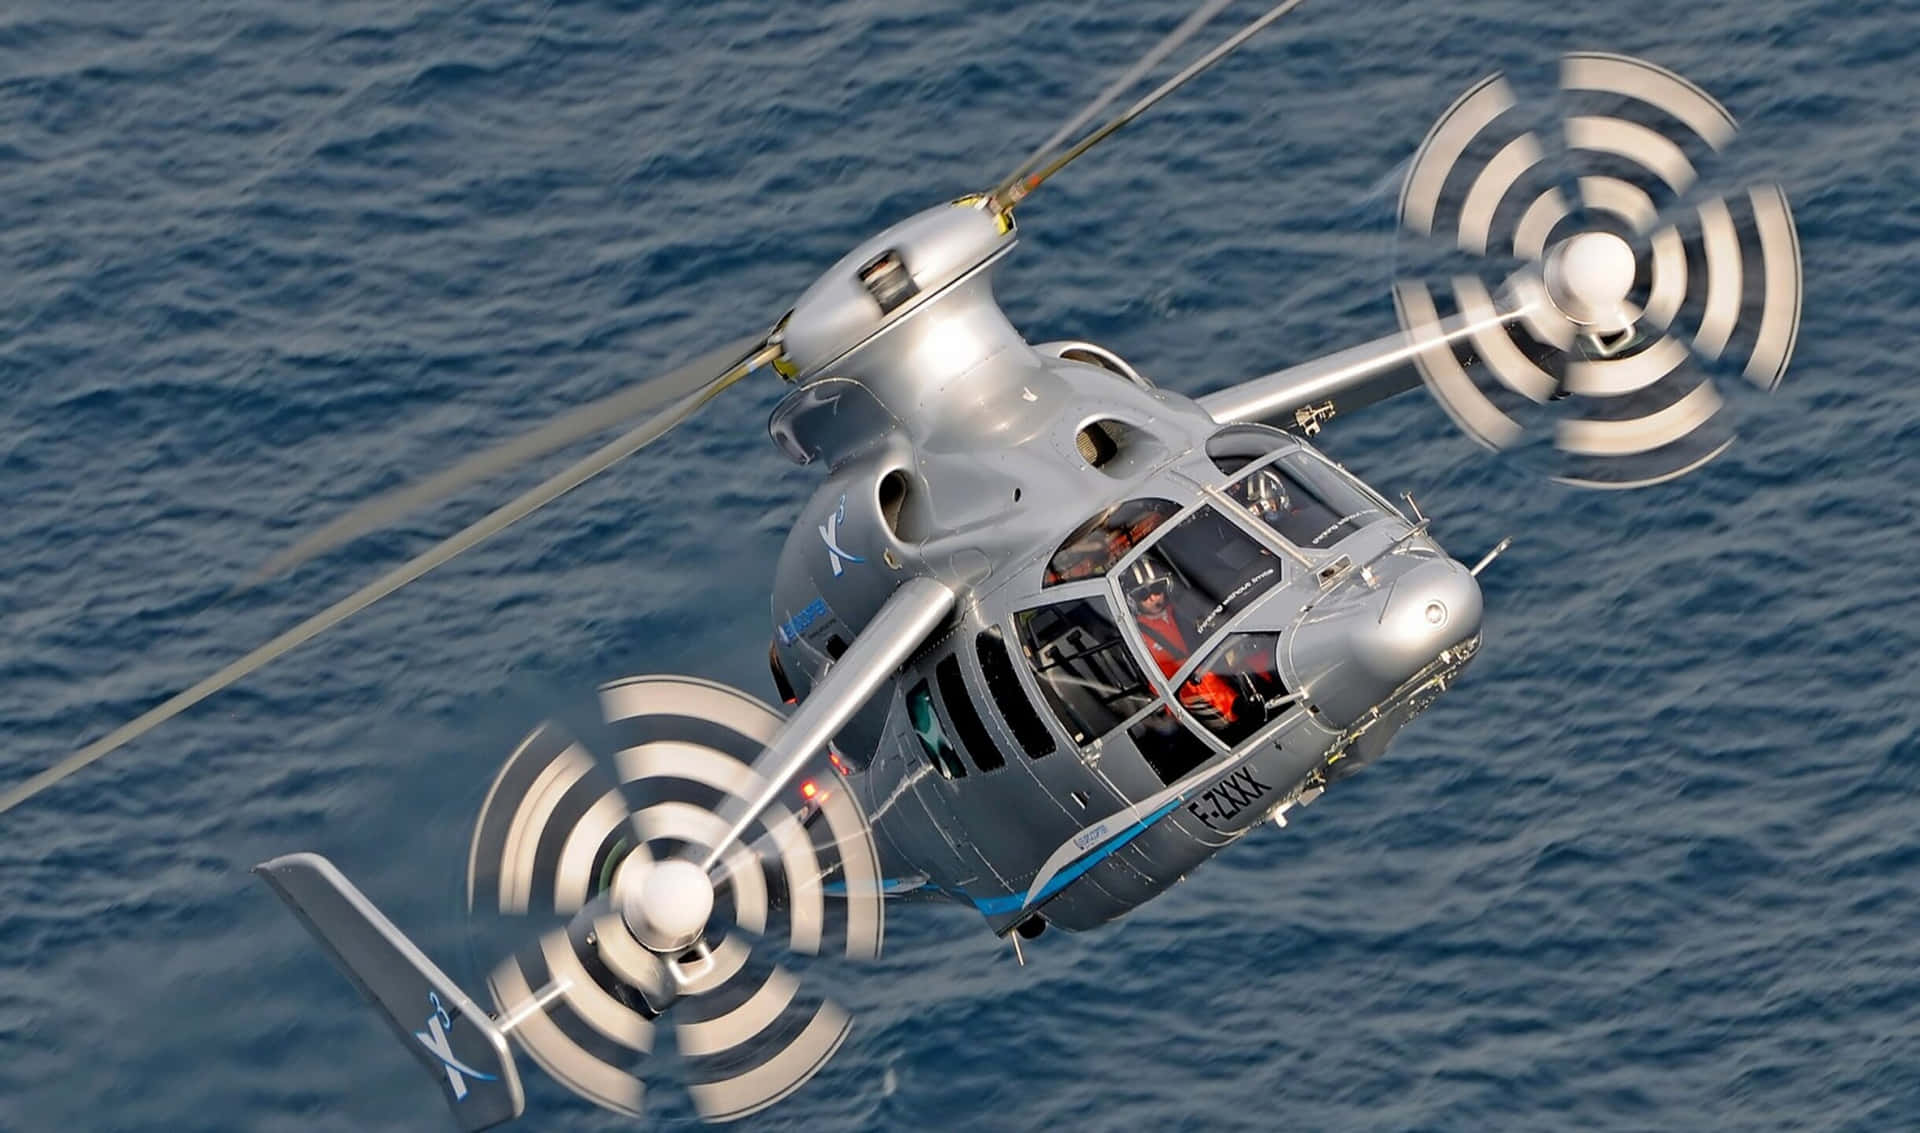 2440x1440 Helicopters Background Wallpaper